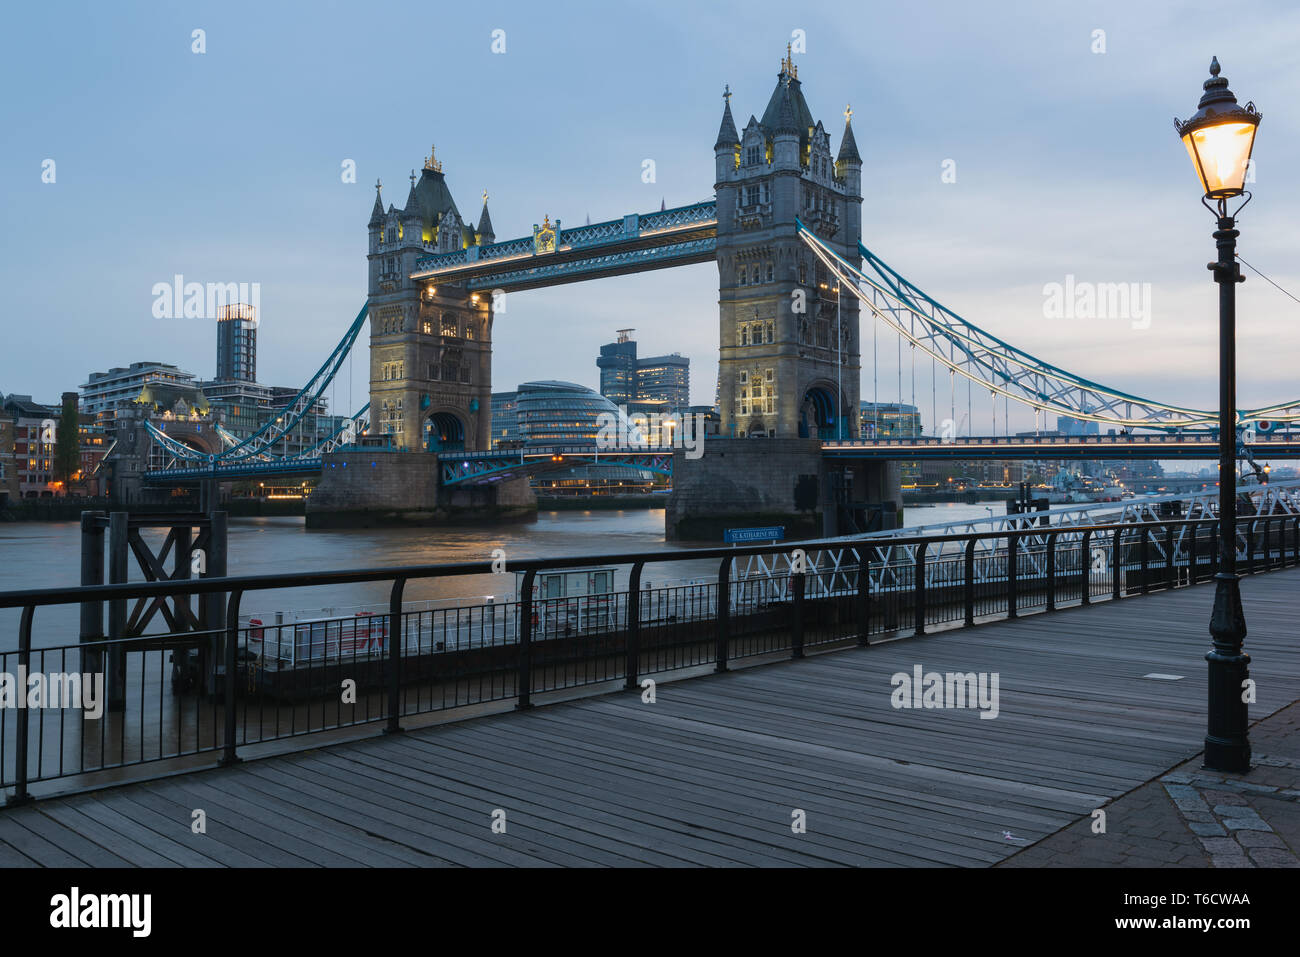 The famous tower bridge in London - England Stock Photo